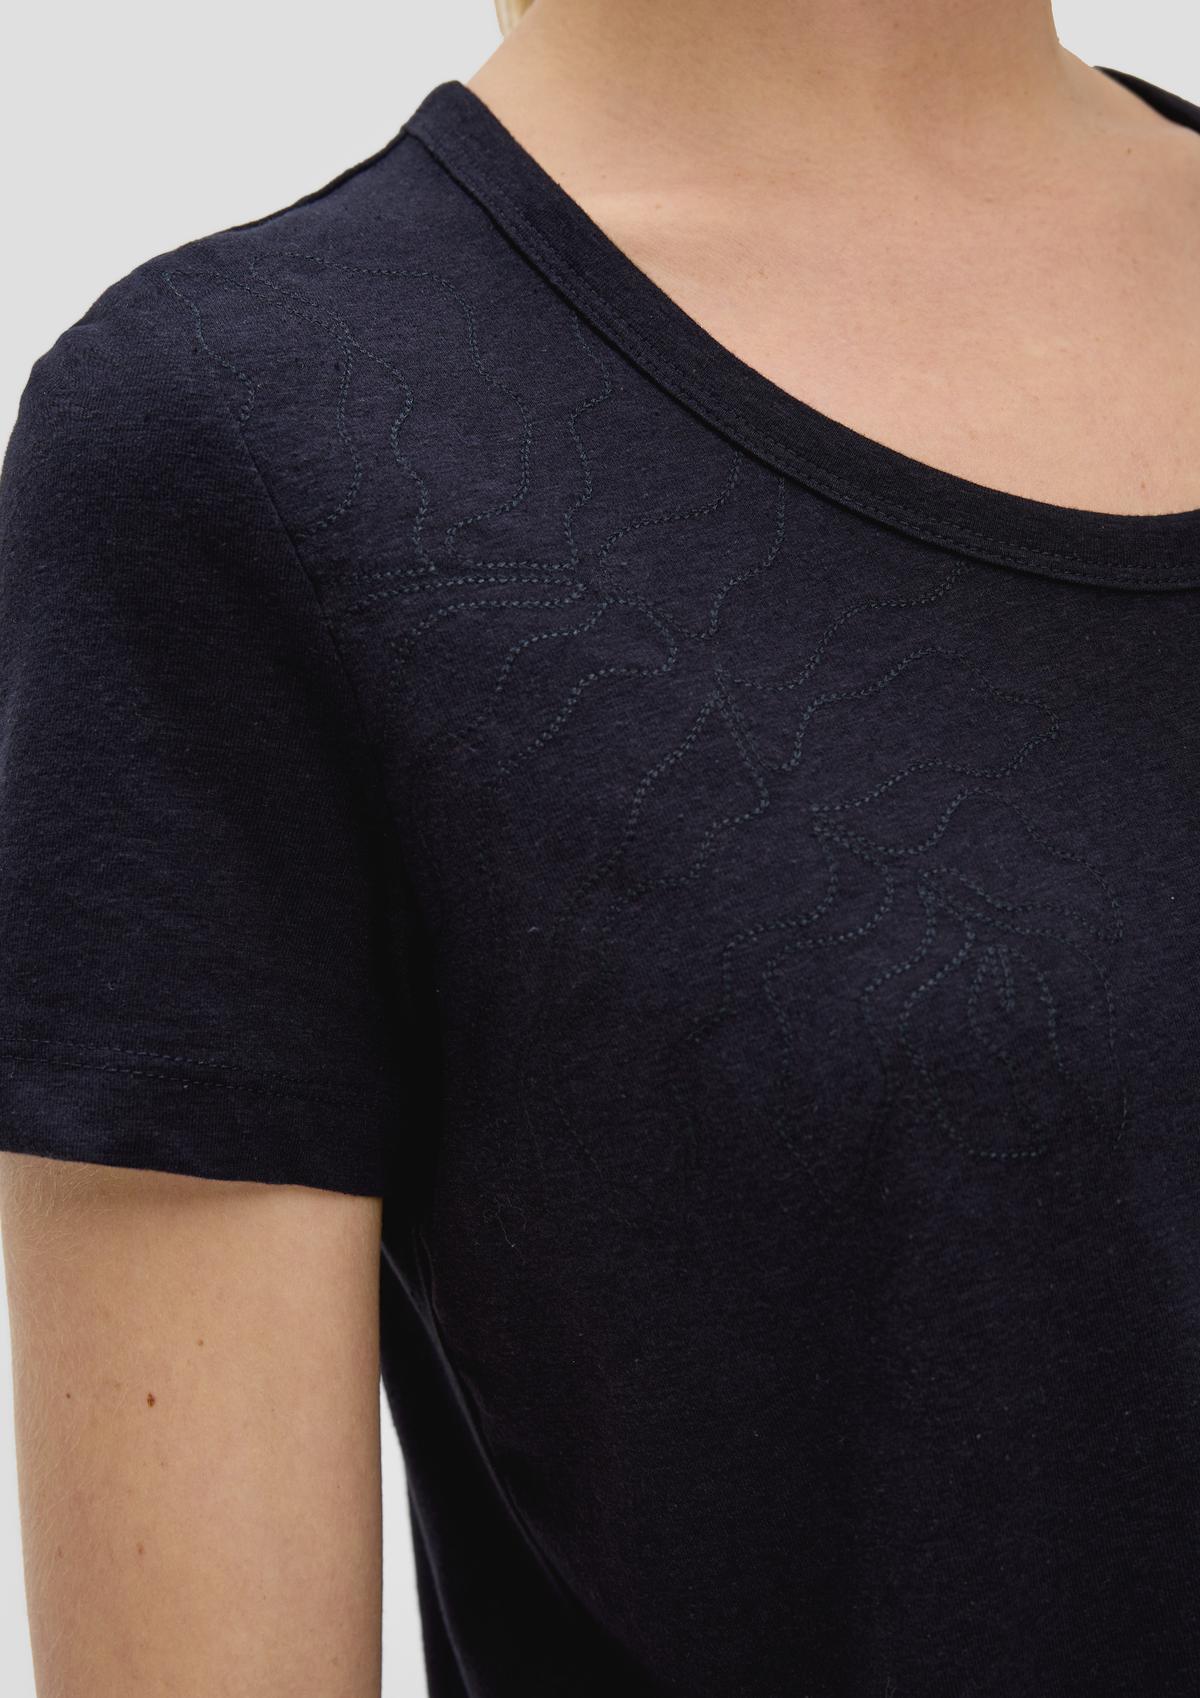 s.Oliver Embroidered T-shirt